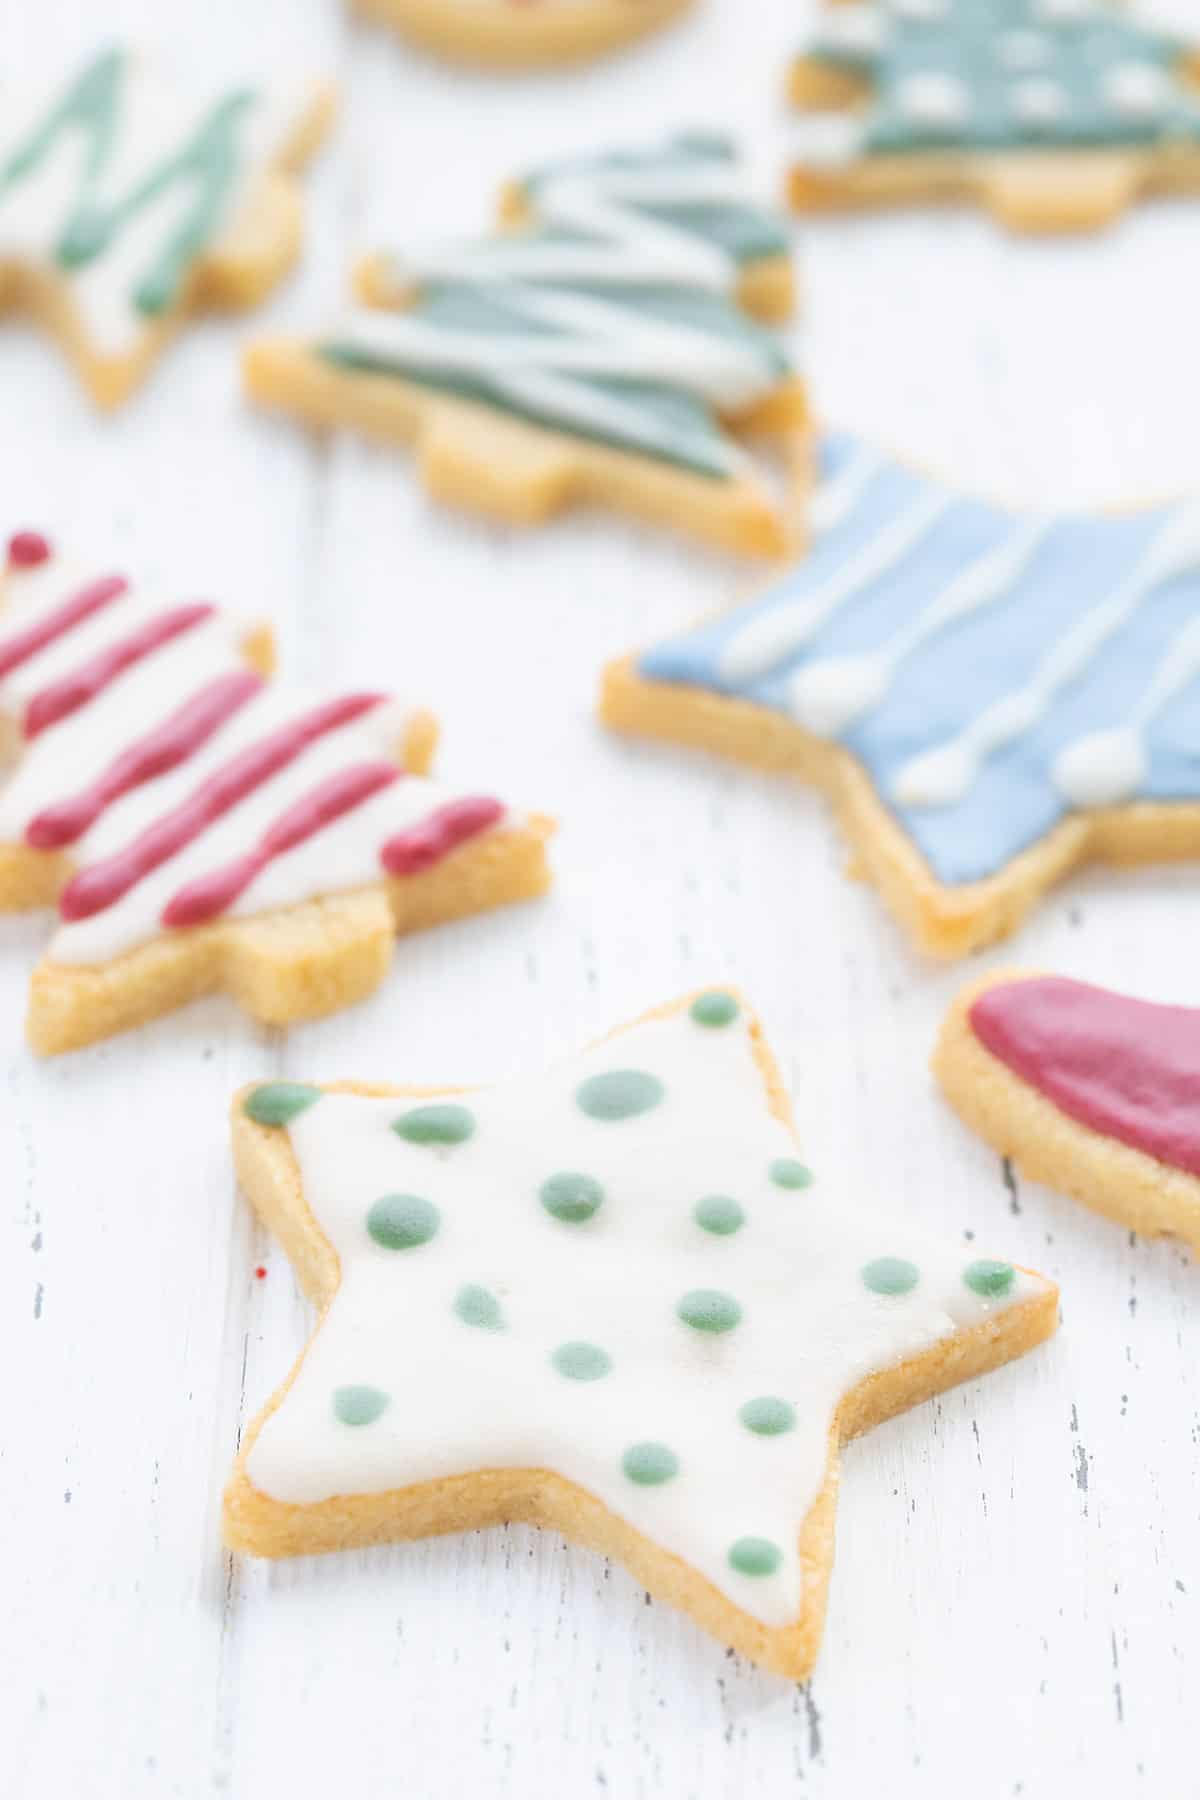 Decorated keto sugar cookies laid out on a white wooden table.